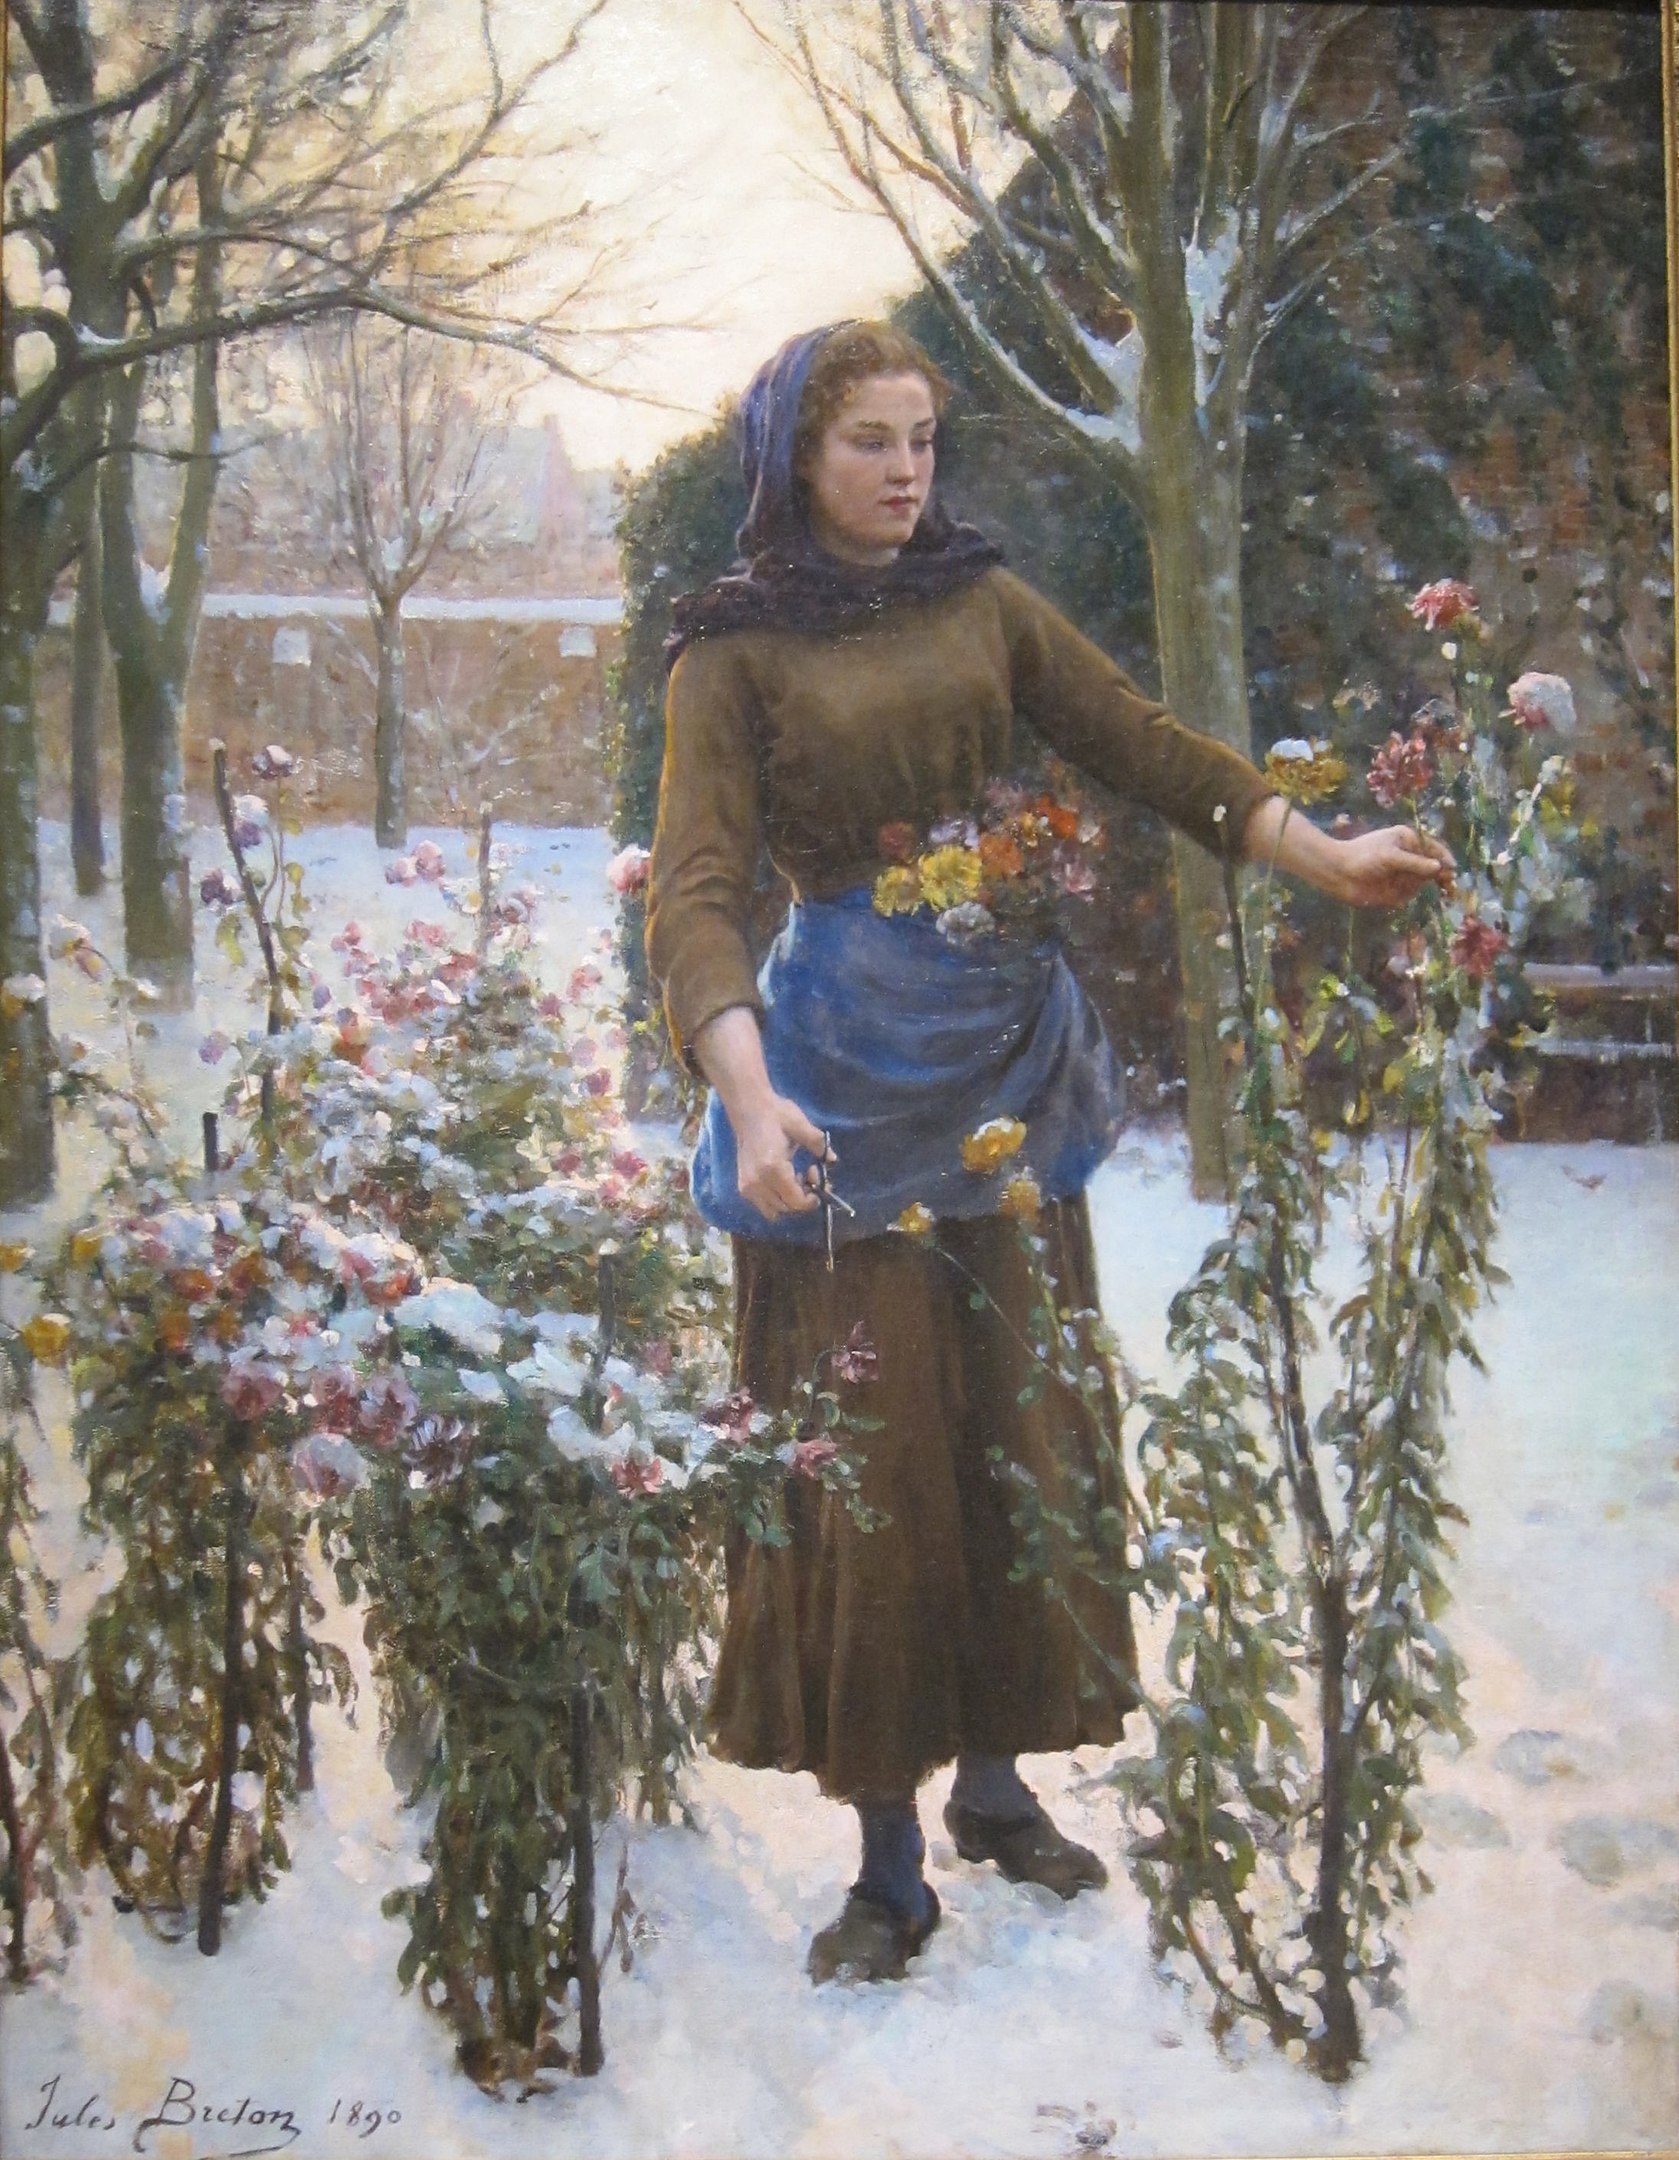 A woman plucking flowers in winter